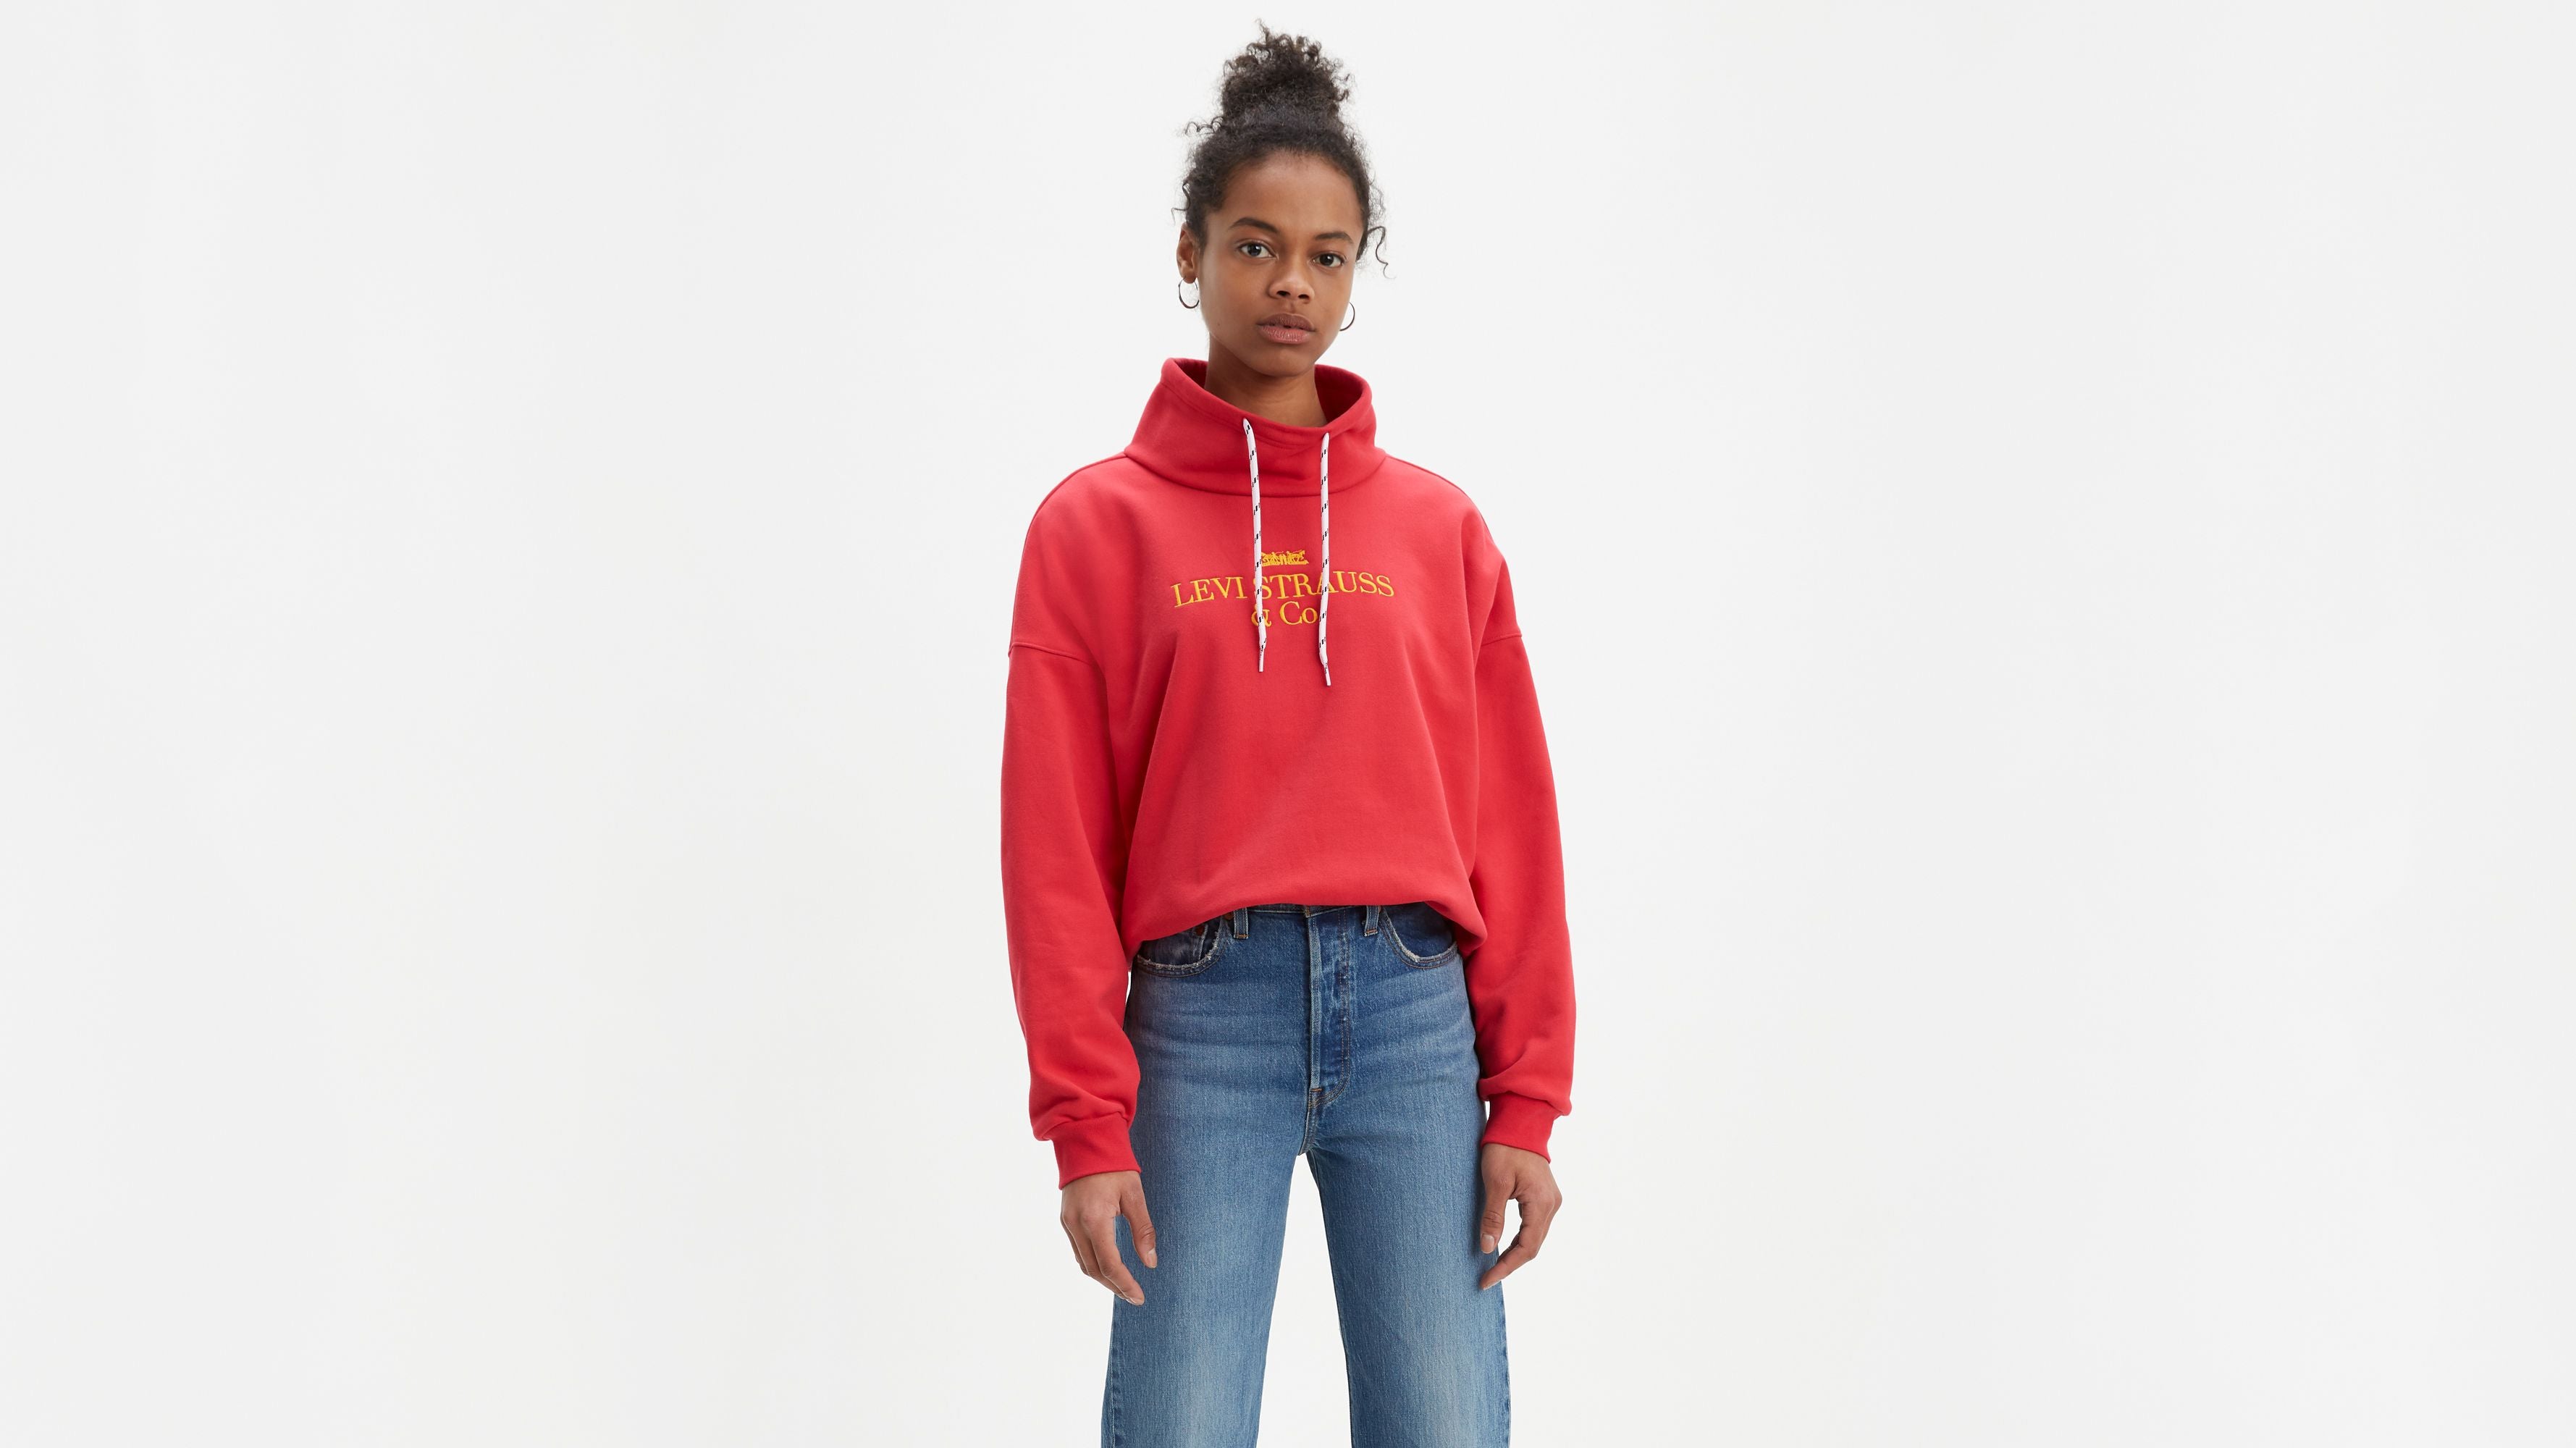 Levis Sadie Funnel Neck Jersey – Oxfords Clothing